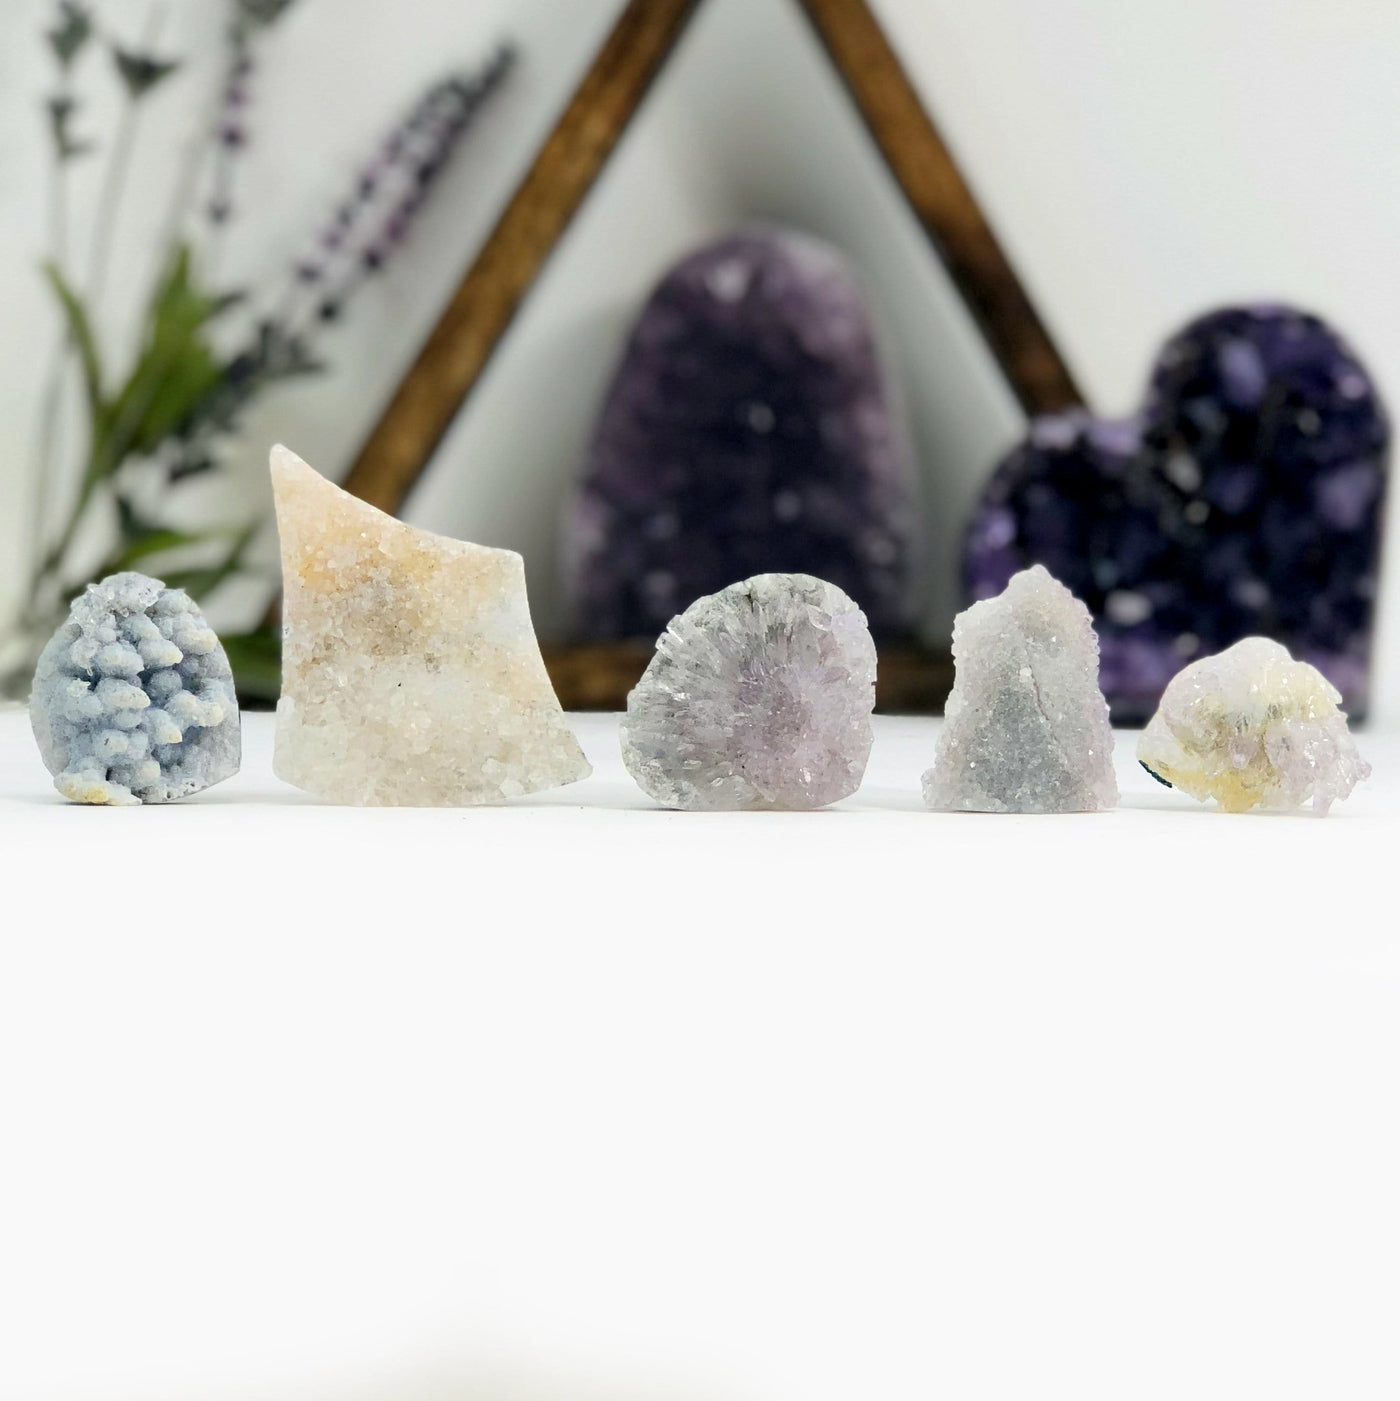 5 Amethyst Flower Crystal Clusters with decorations in the background